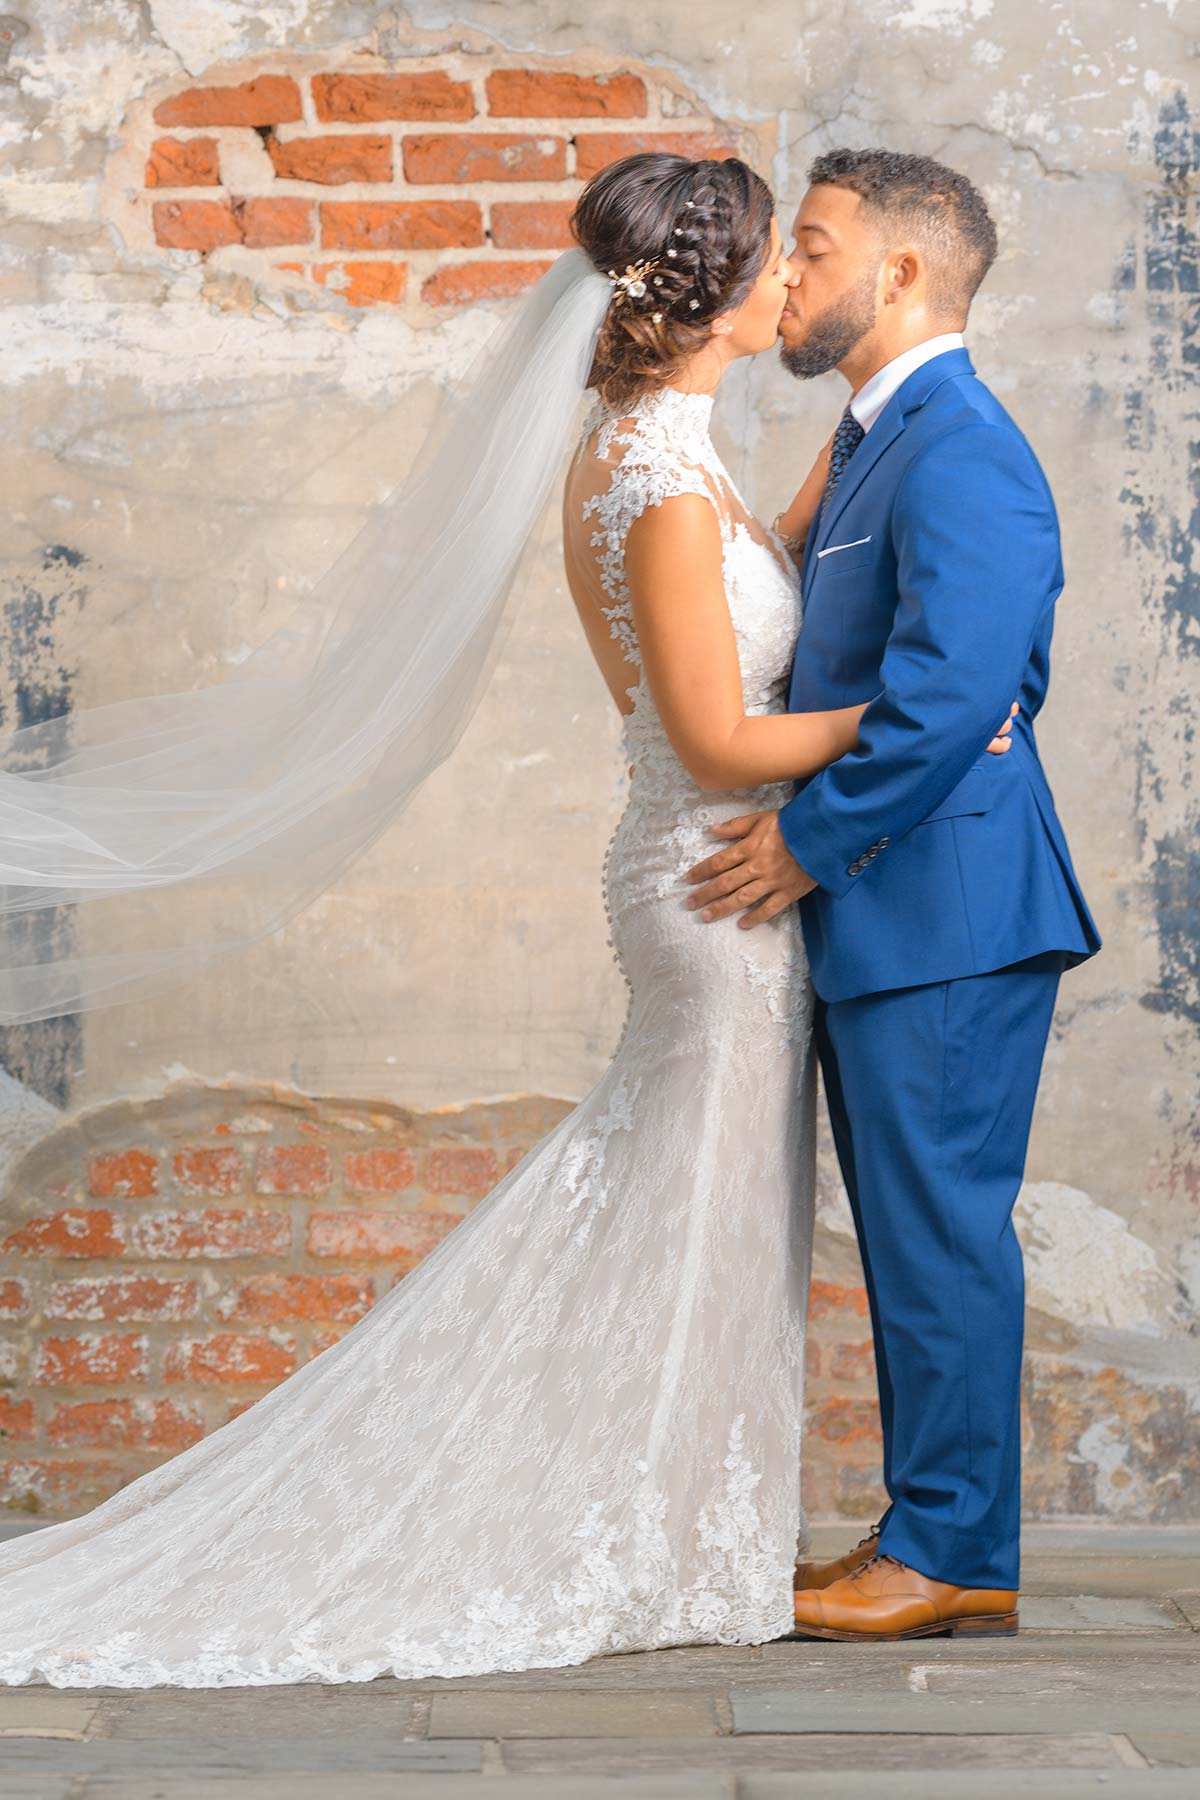 A bride and groom share a romantic kiss in front of an old brick wall captured by Chris Spicks Photography, Houston's creative photographer.